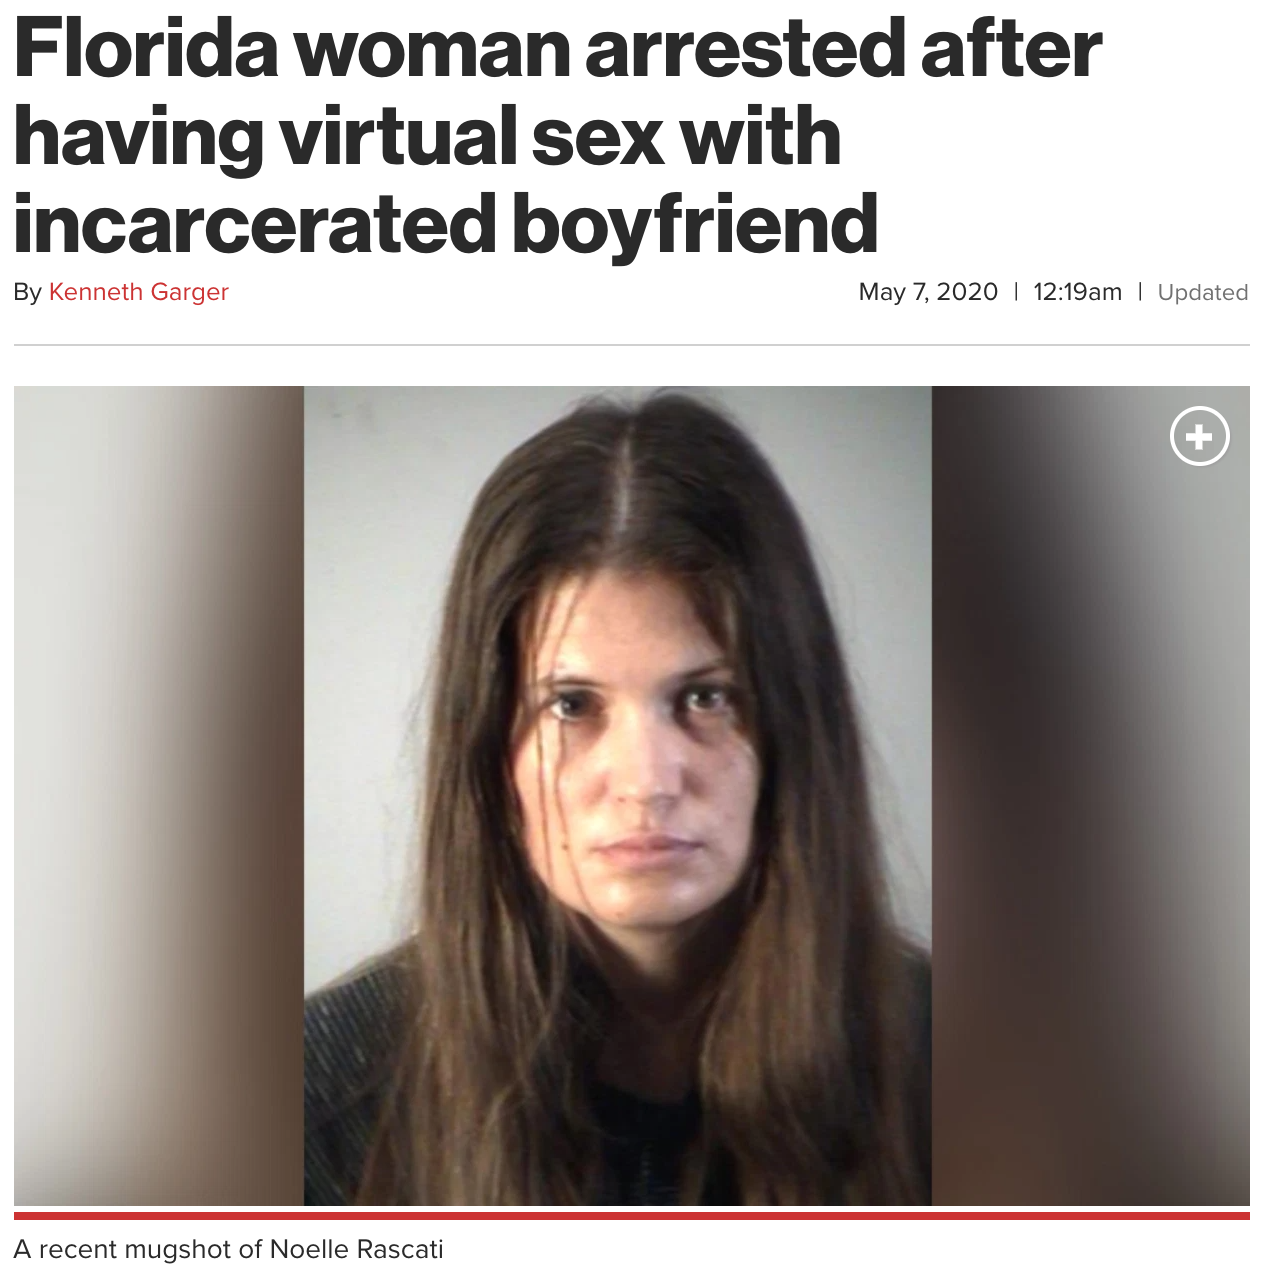 Florida woman arrested after having virtual sex with incarcerated boyfriend